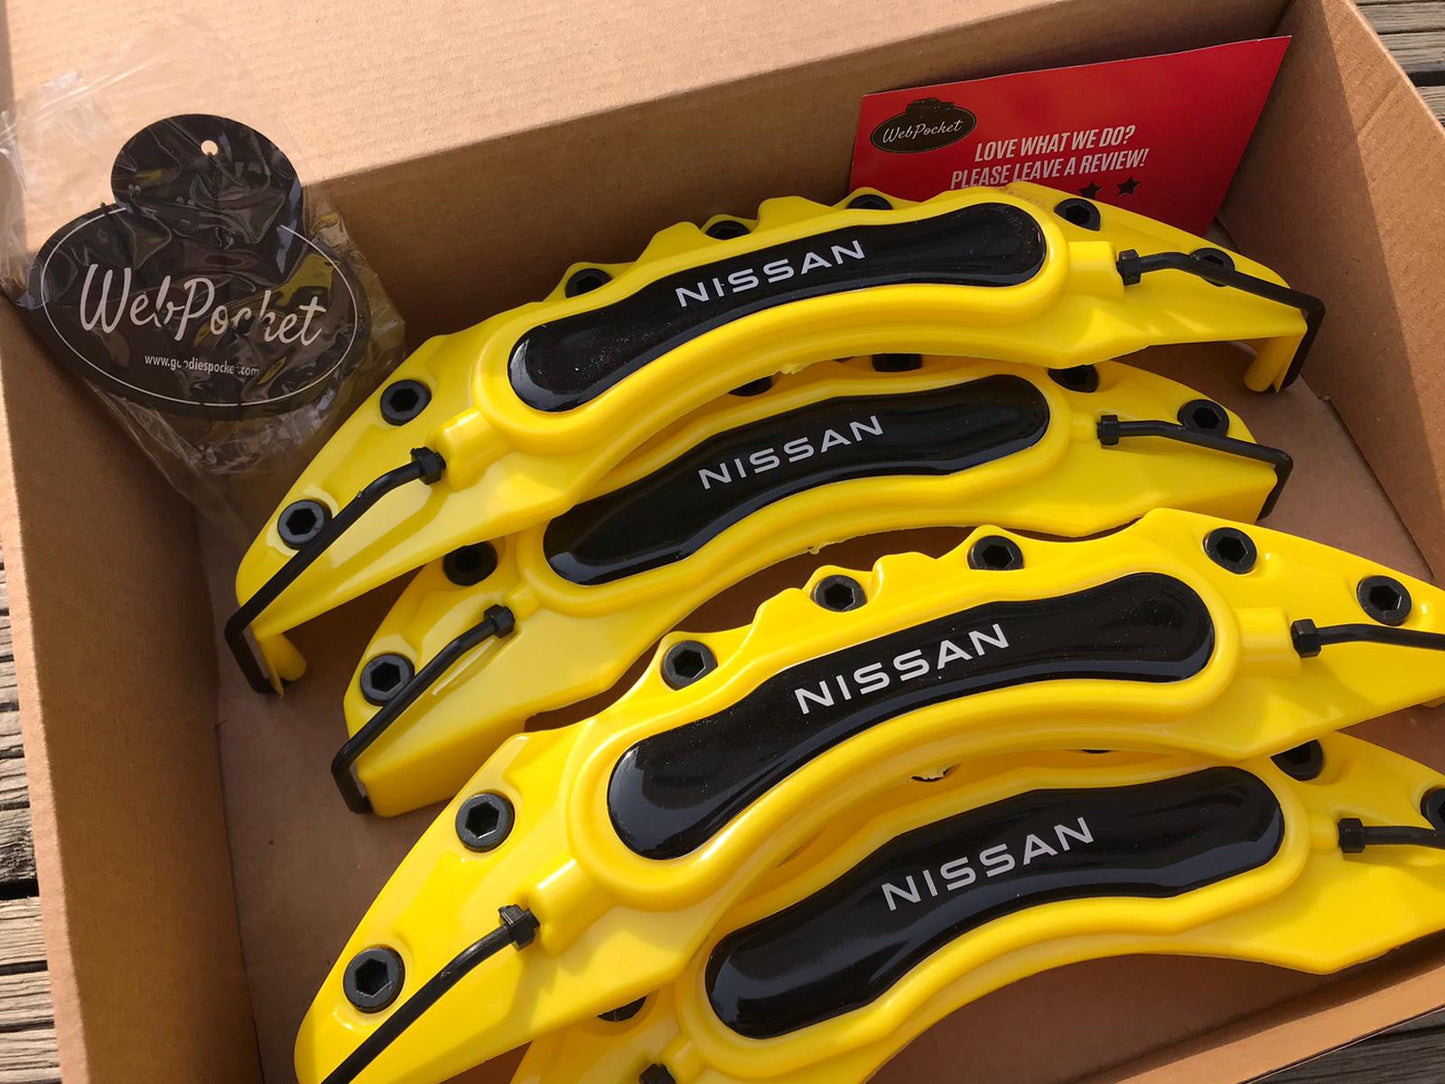 4Pc for Nissan Yellow Big Brake Caliper Covers / Nissan Accesories